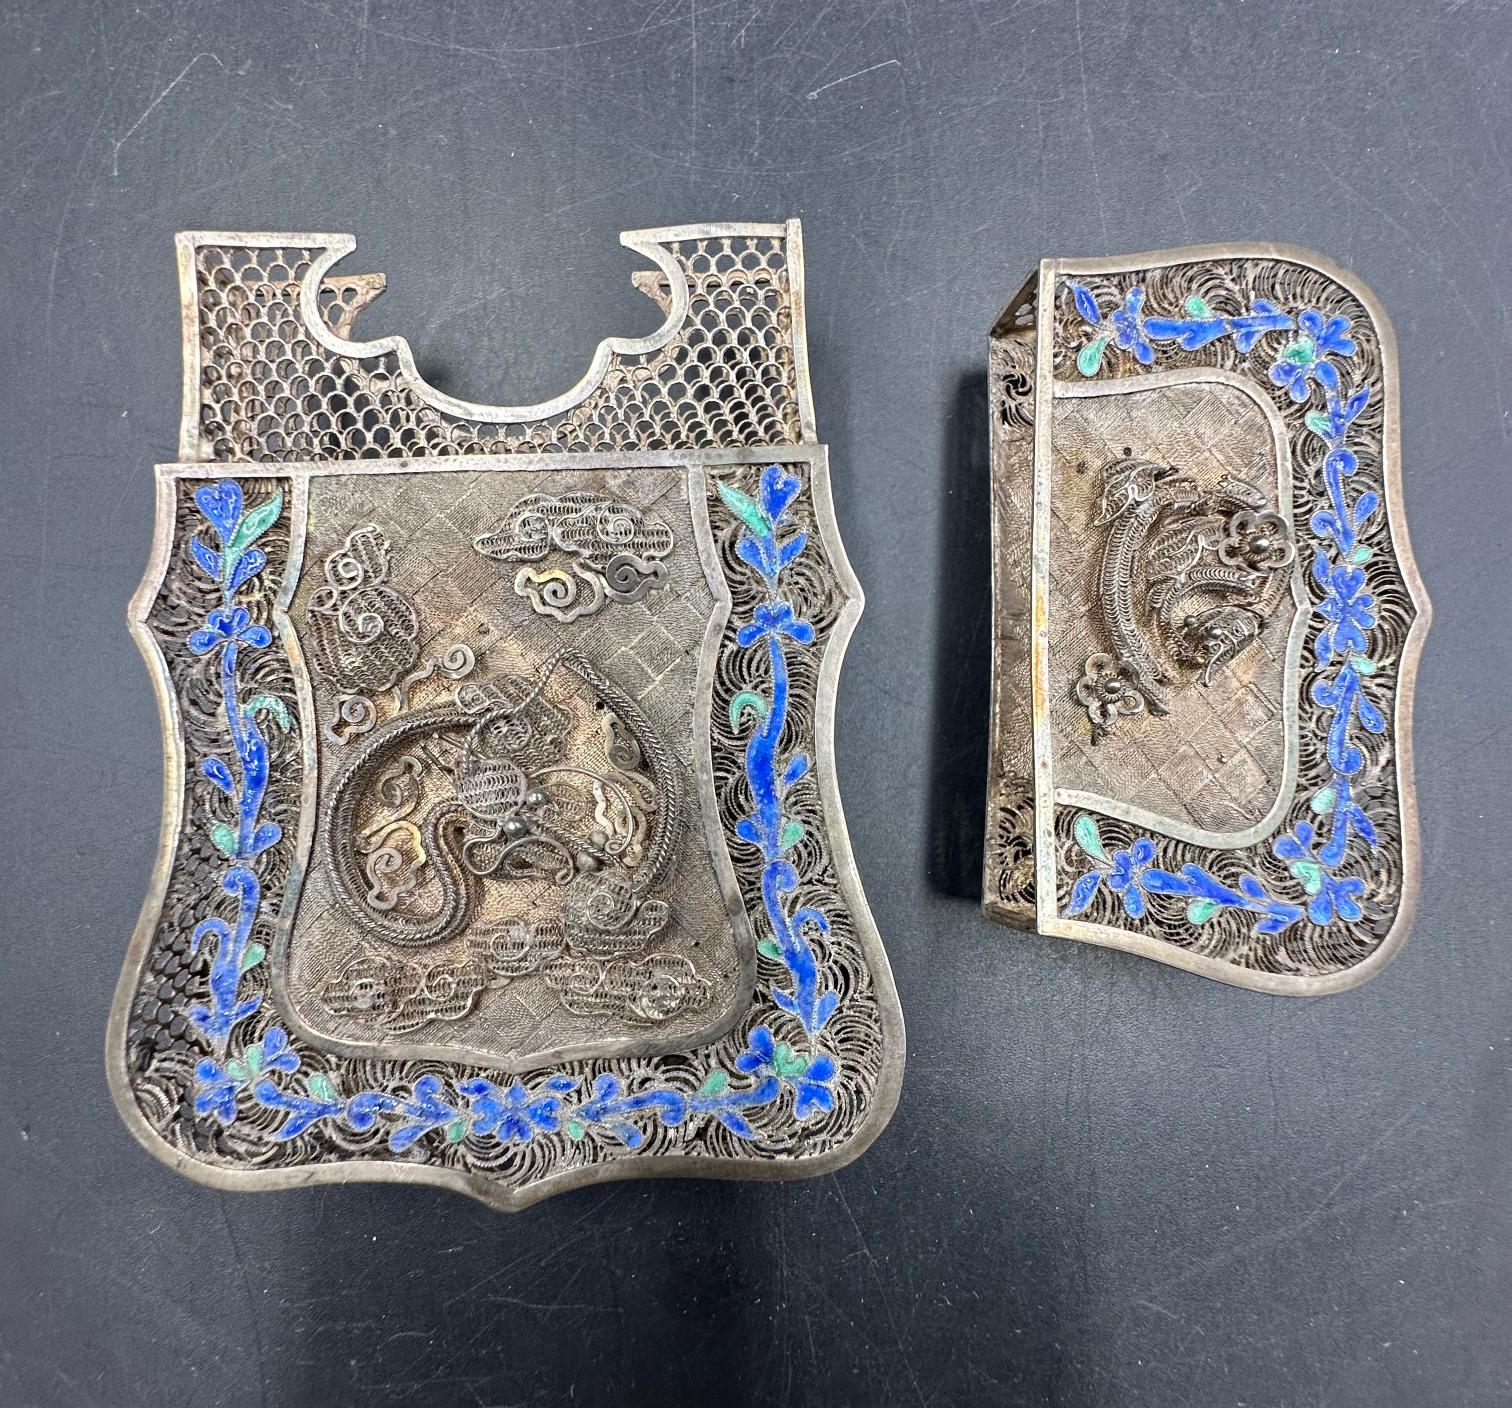 A 19th Century Chinese silver wirework card holder with serpentine edge and floral border - Image 5 of 8